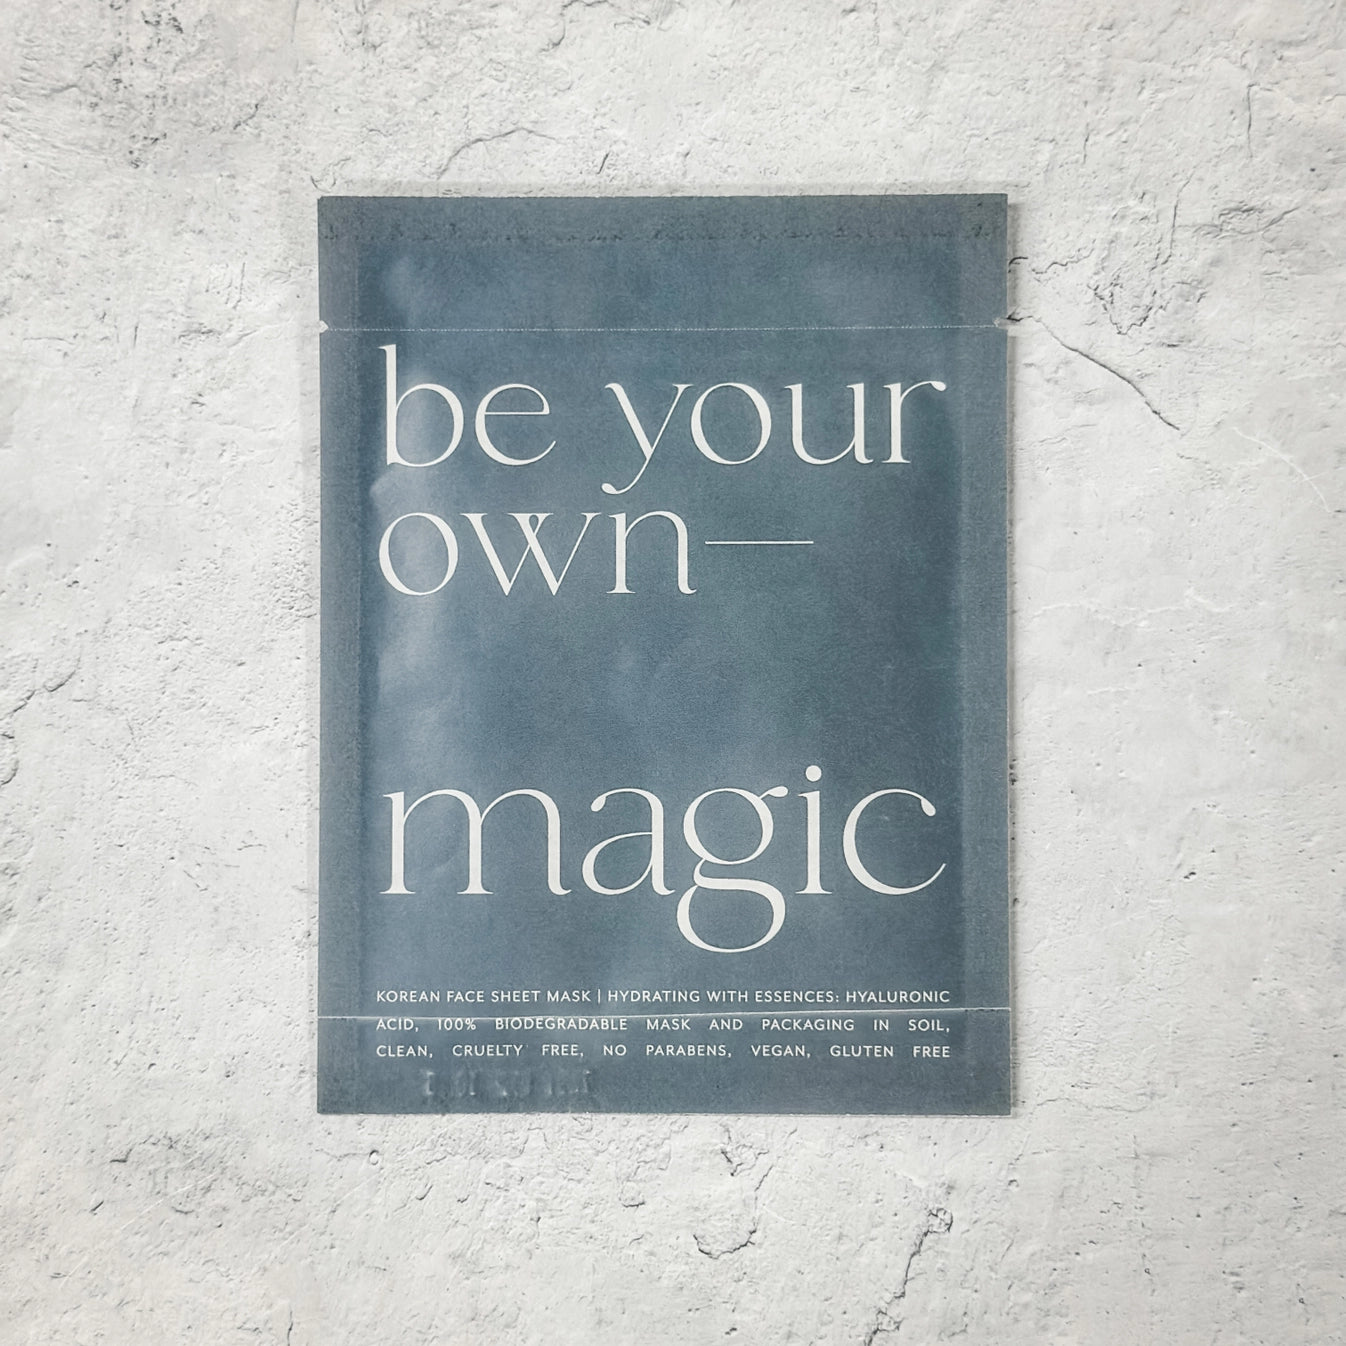 Be your own magic mask